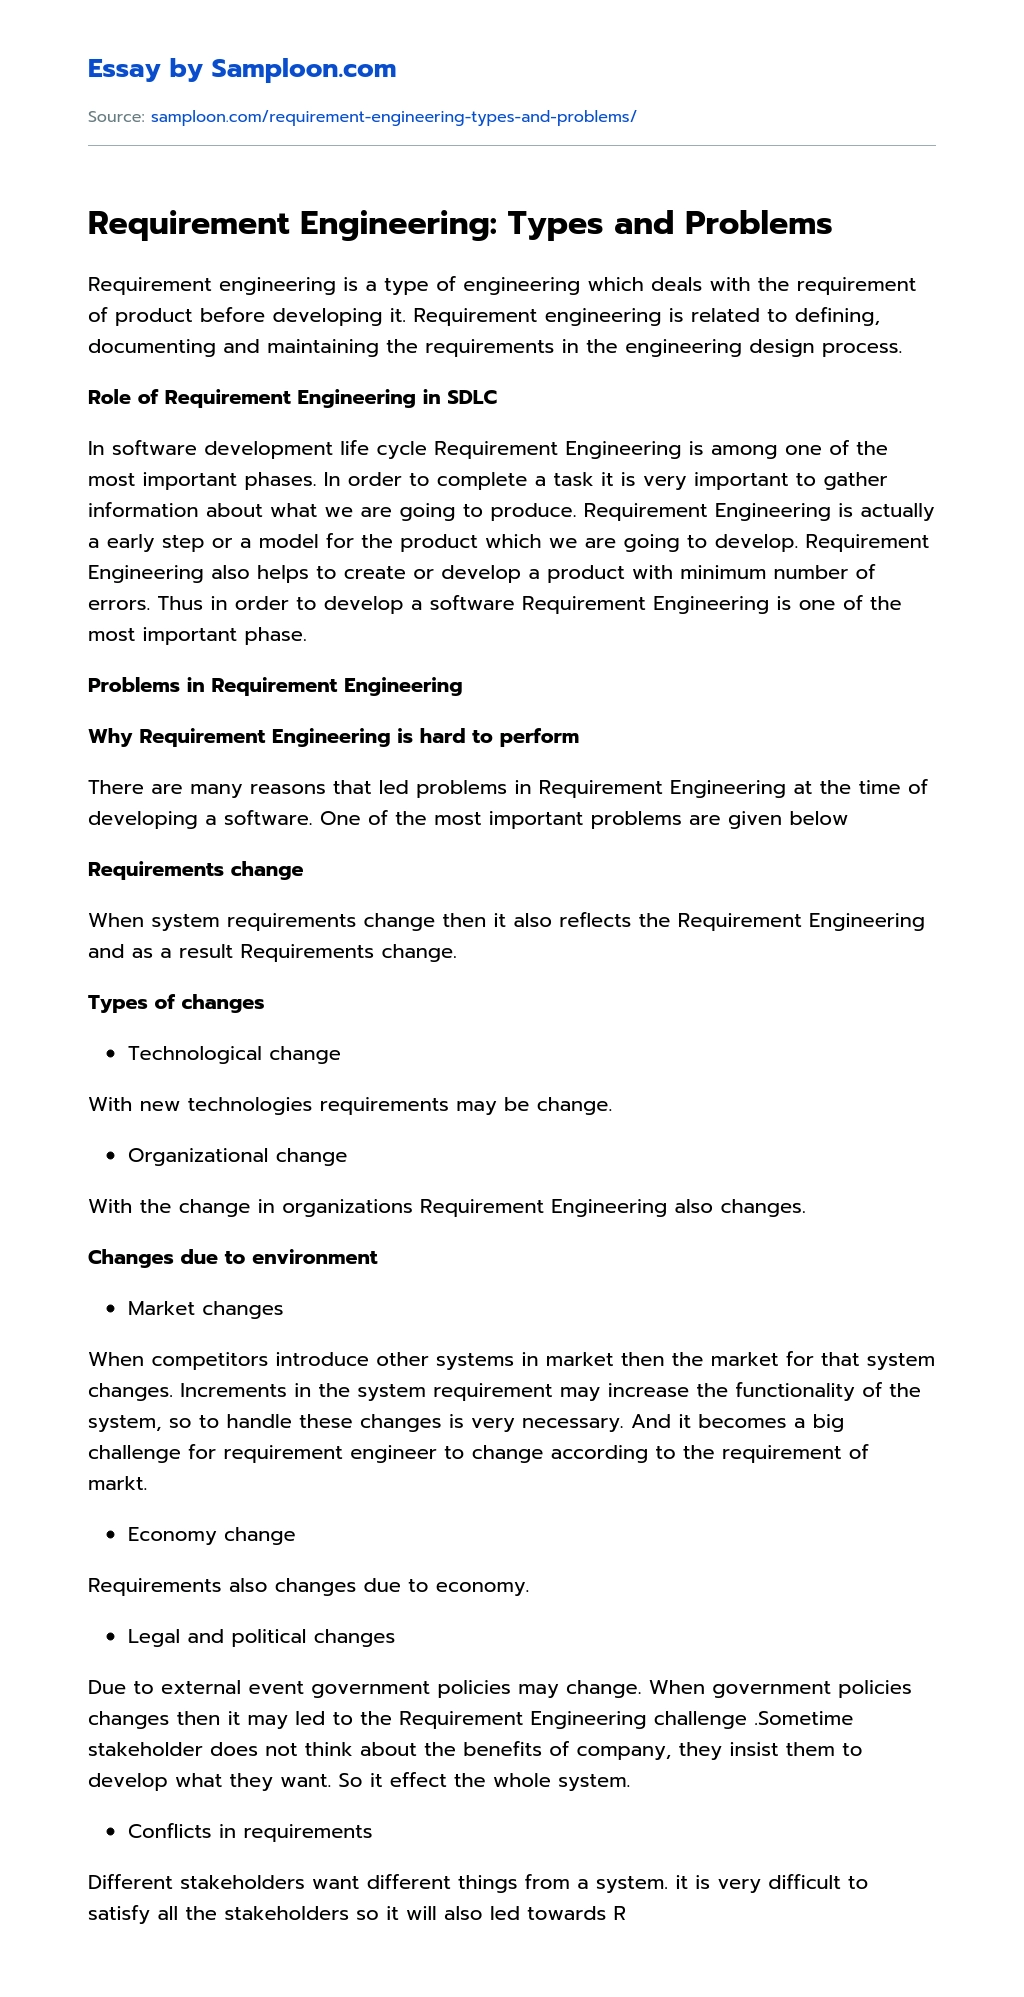 Requirement Engineering: Types and Problems essay